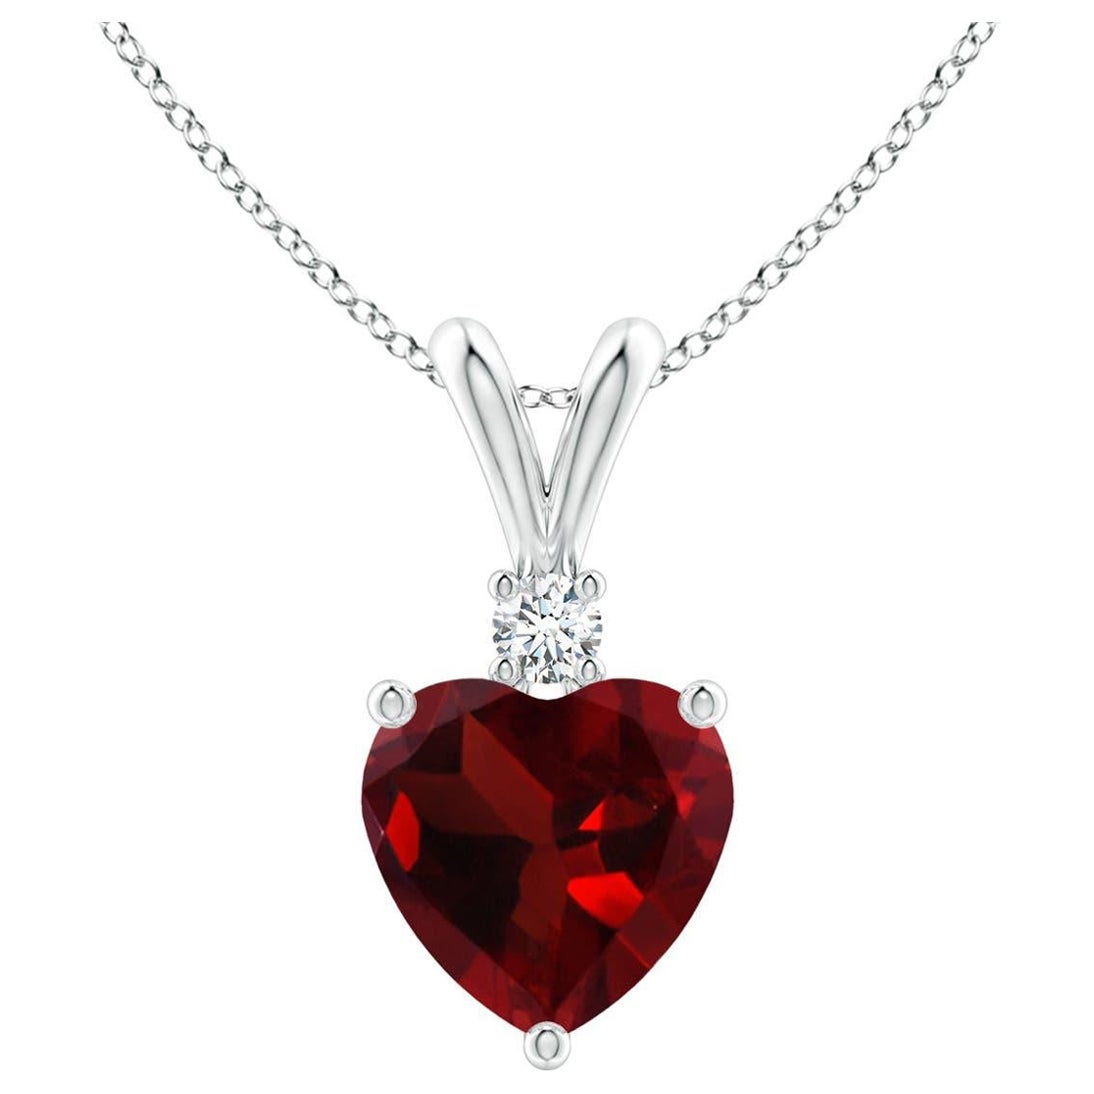 Natural Heart-Shaped 0.90ct Garnet Pendant with Diamond in 14ct White Gold